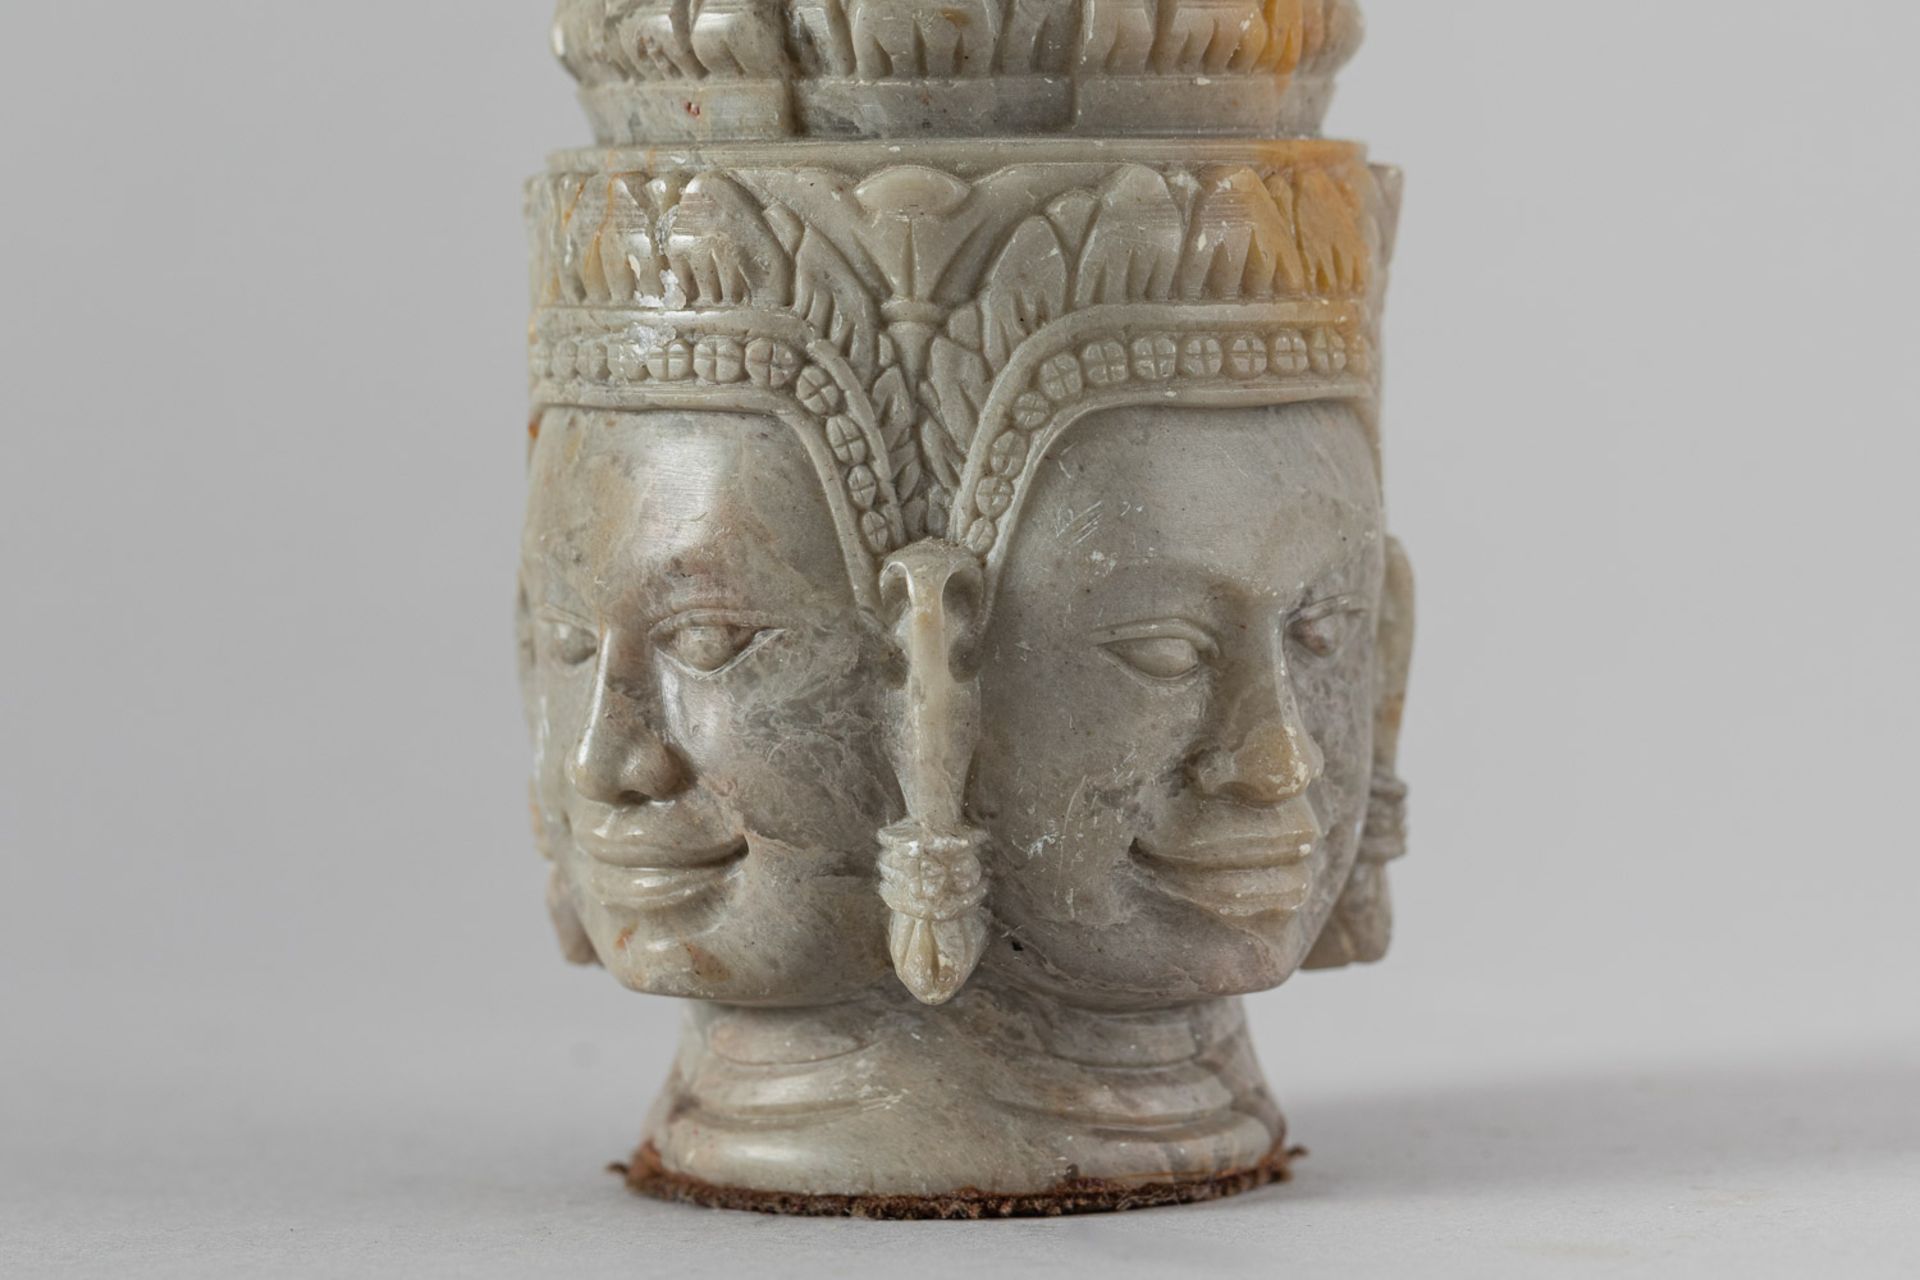 Indochinese sculpture - Image 3 of 3